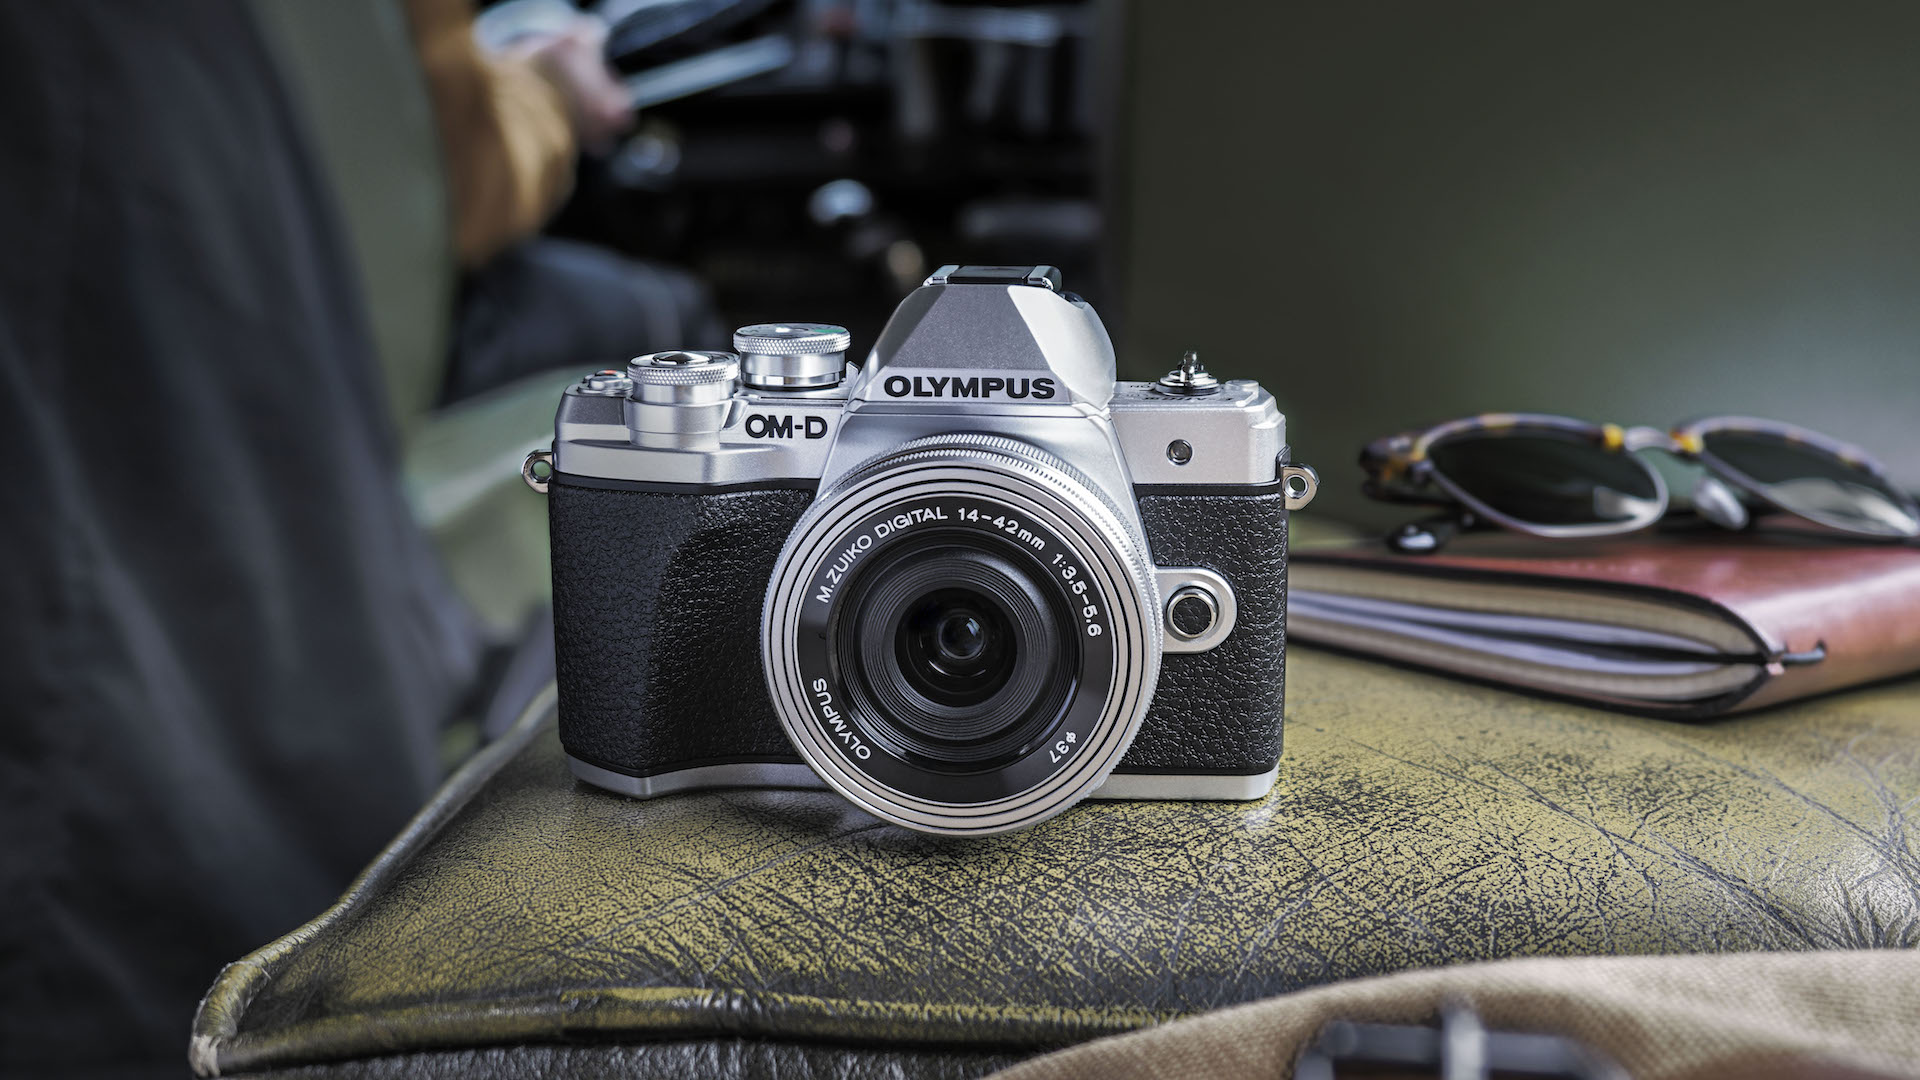 Olympus OM-D E-M10 mark III: price, specs and release date – Mirrorless